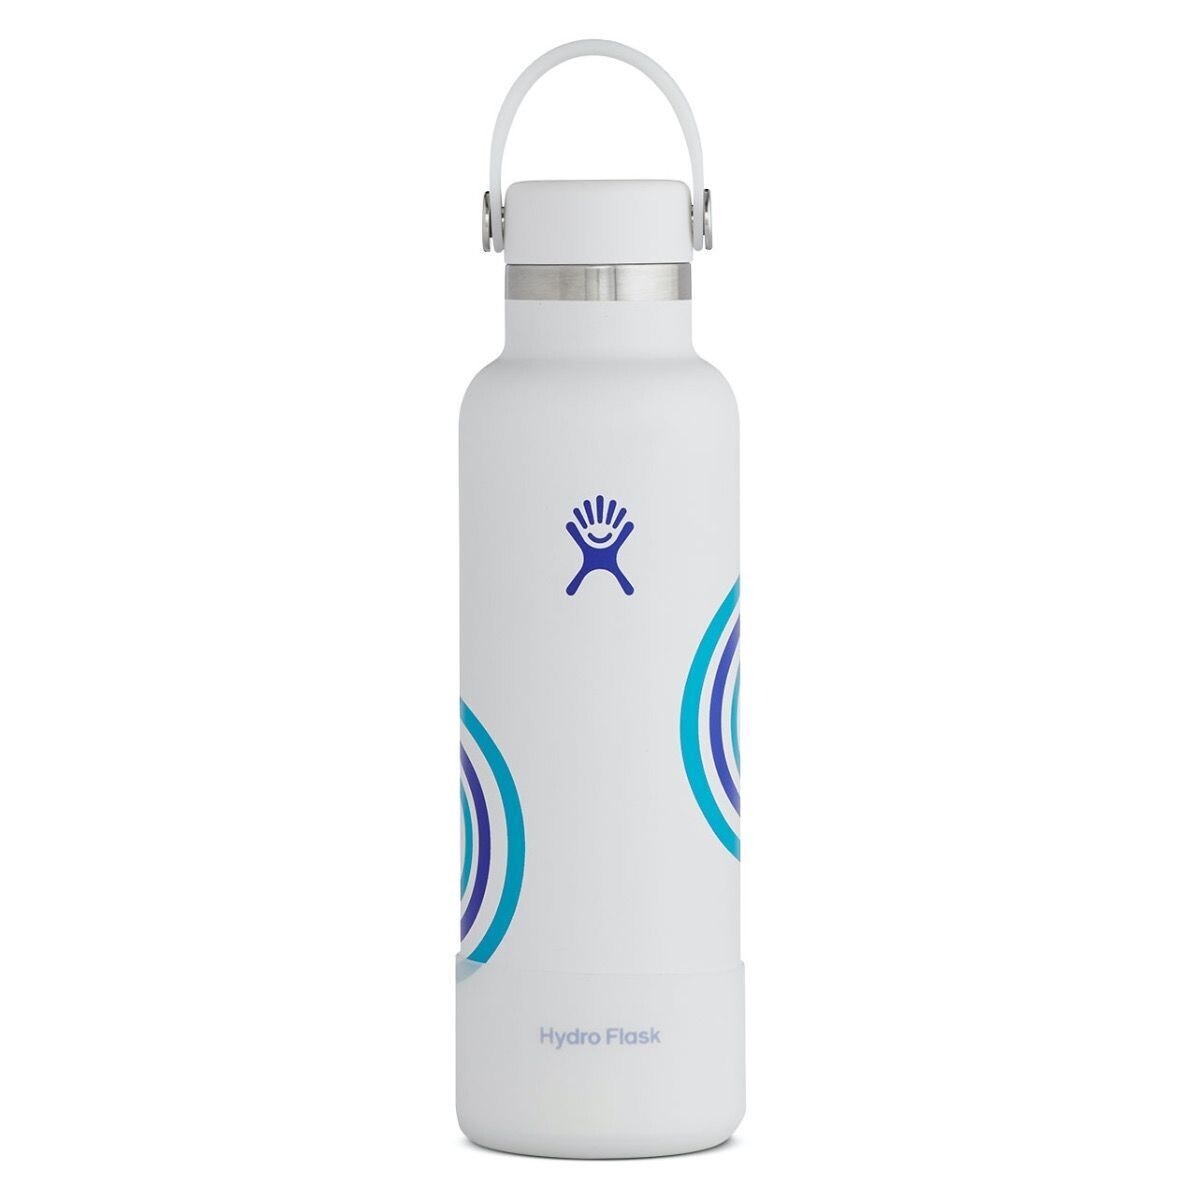 Hydro Flask Refill for Good Limited Edition 21 oz Standard Mouth w/ Flex Cap & Boot WHITECAP